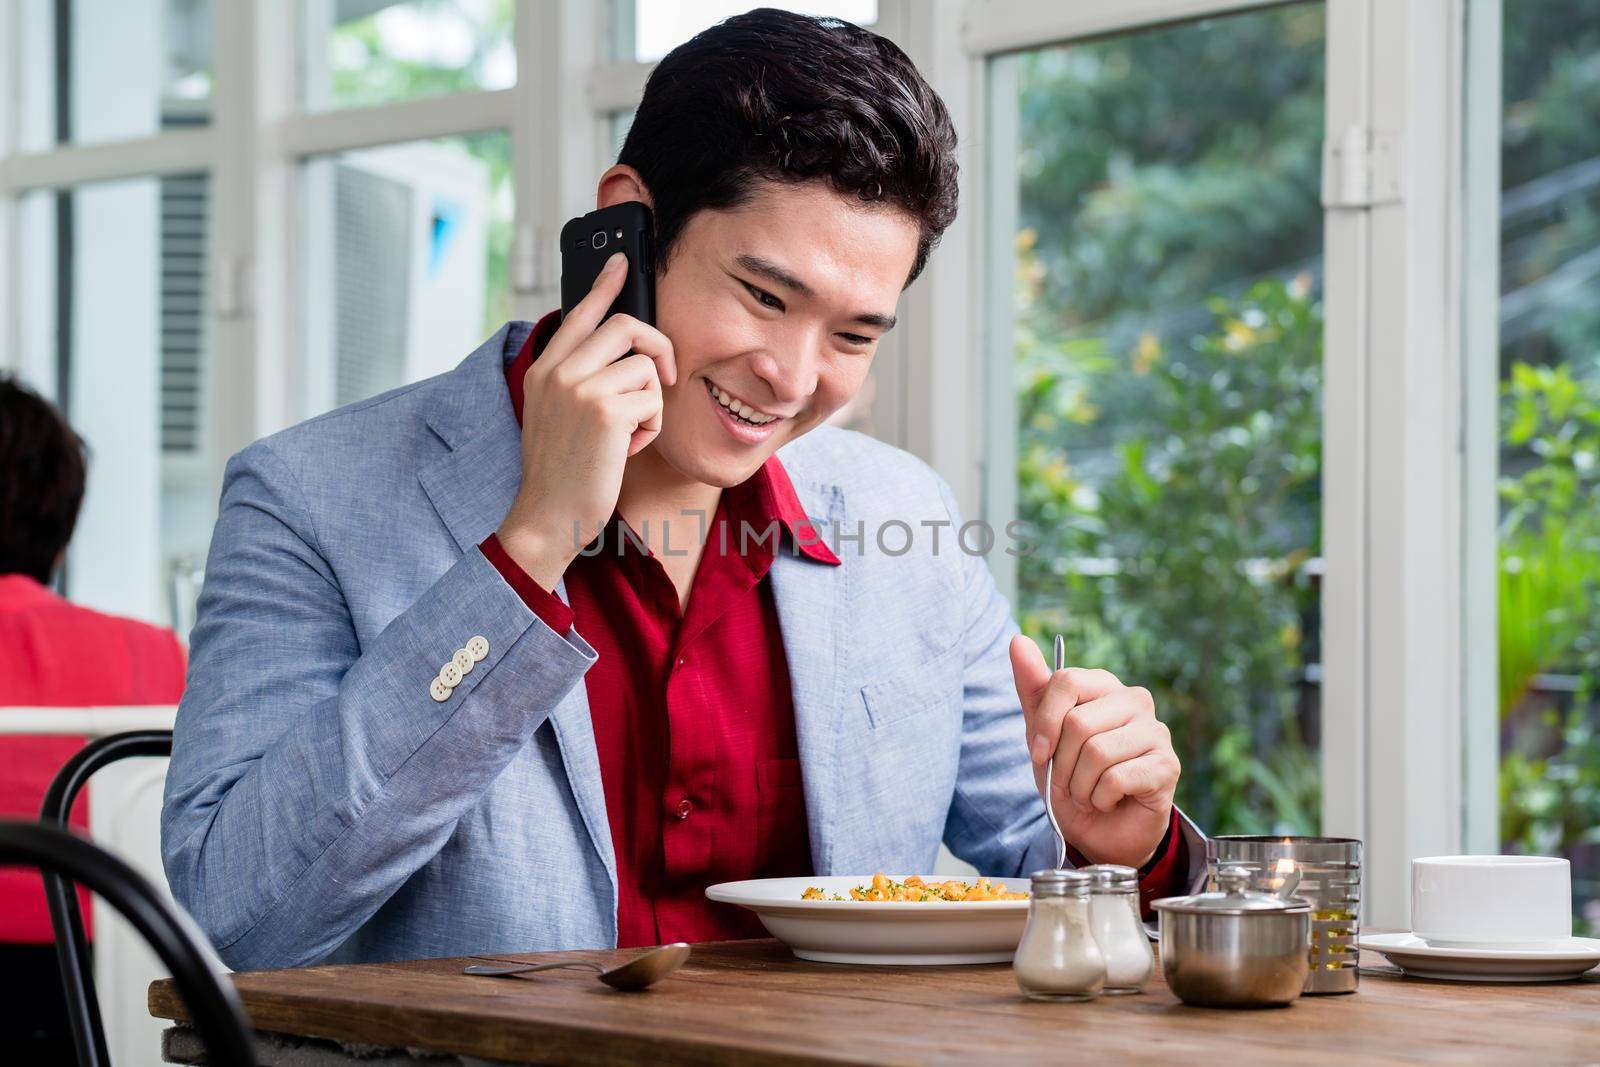 Handsome stylish formal young businessman talking on a mobile phone as he sits at a restaurant table enjoying lunch